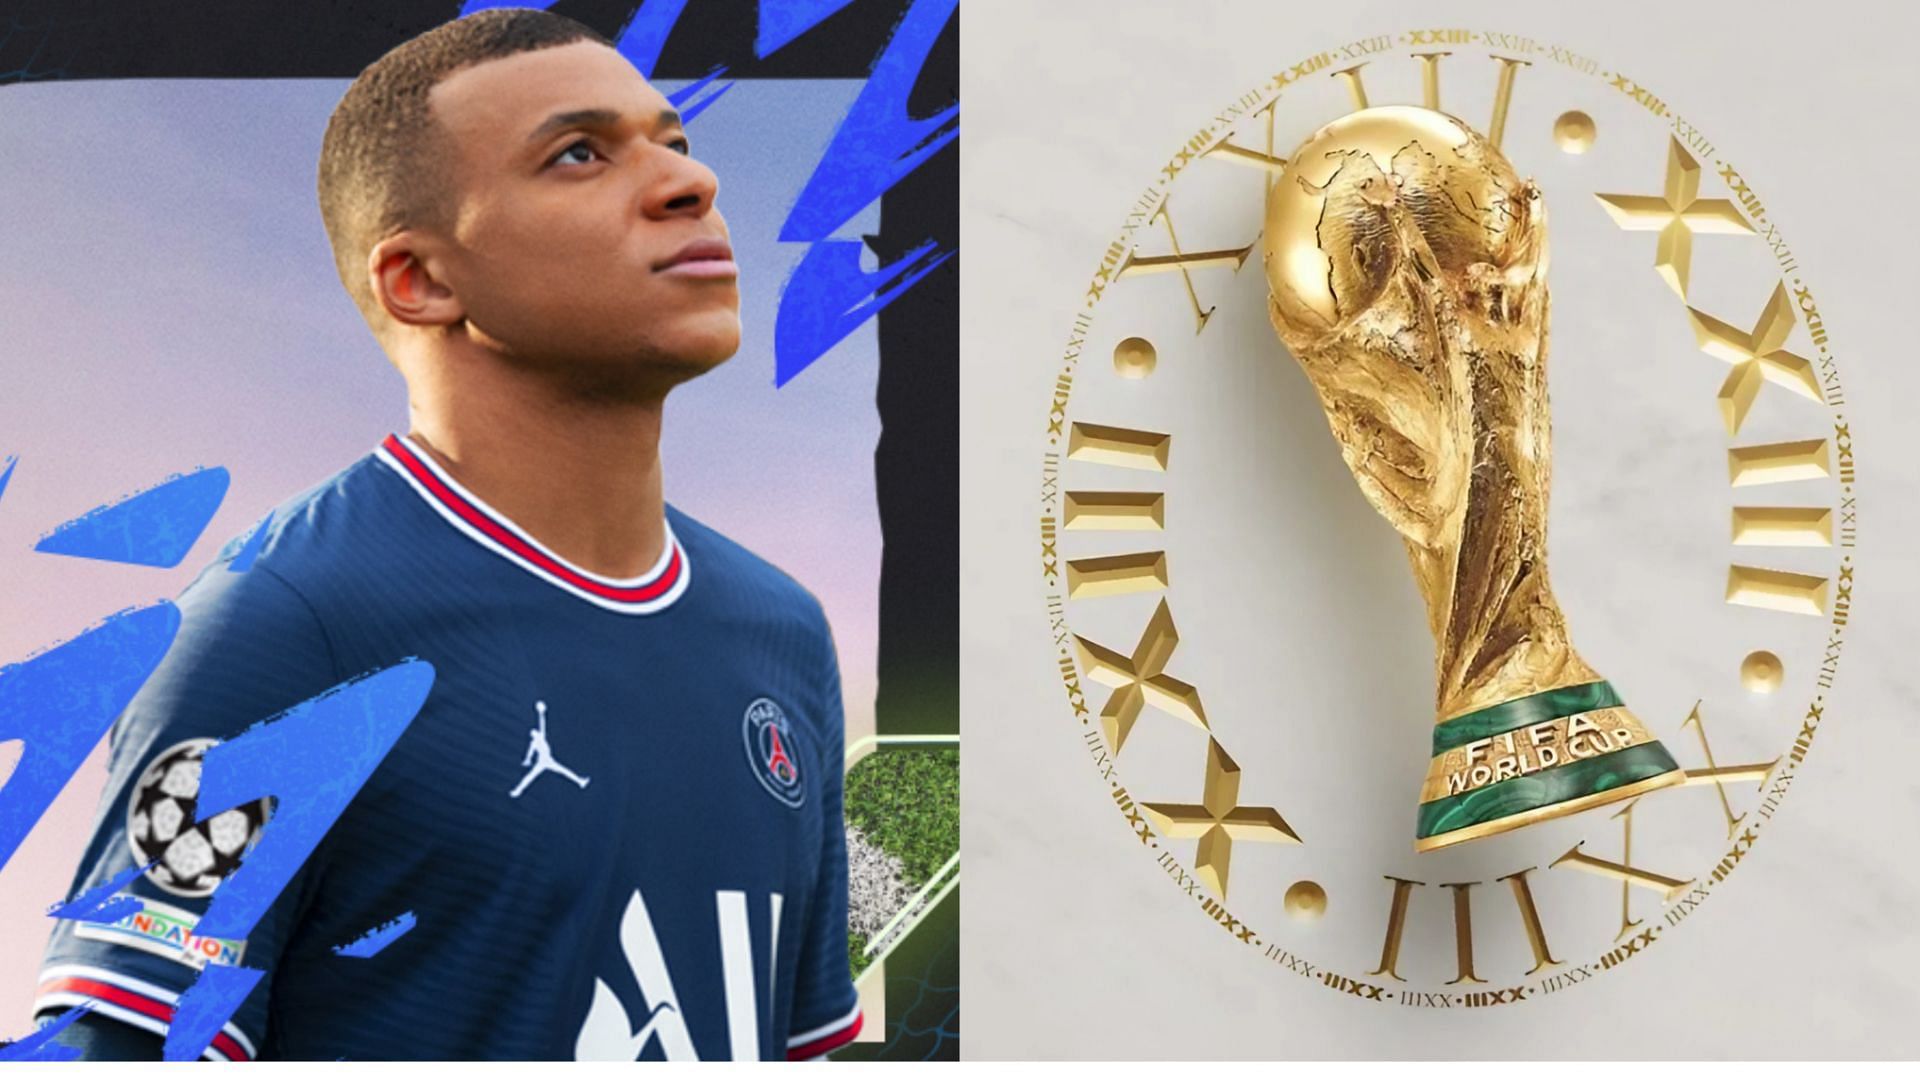 FIFA Mobile World Cup tournament